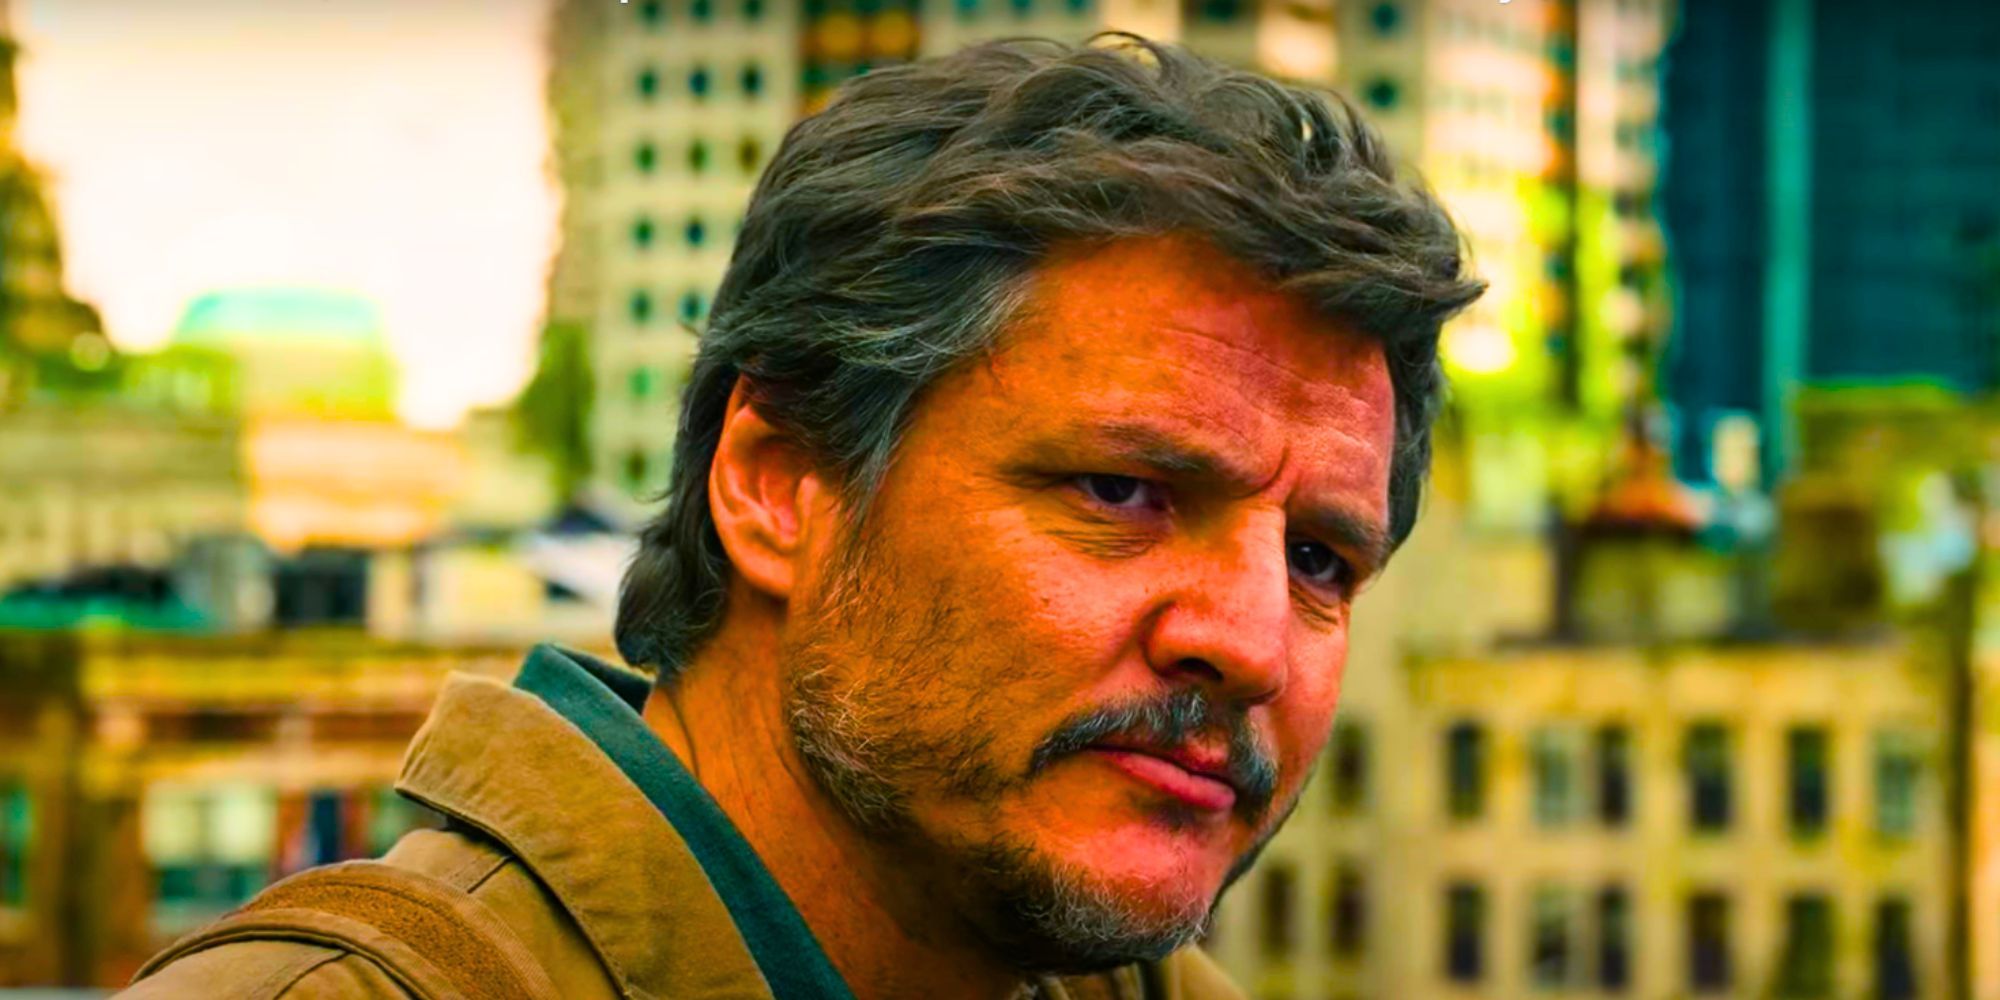 Pedro Pascal looking serious as Joel Miller in The Last of Us.